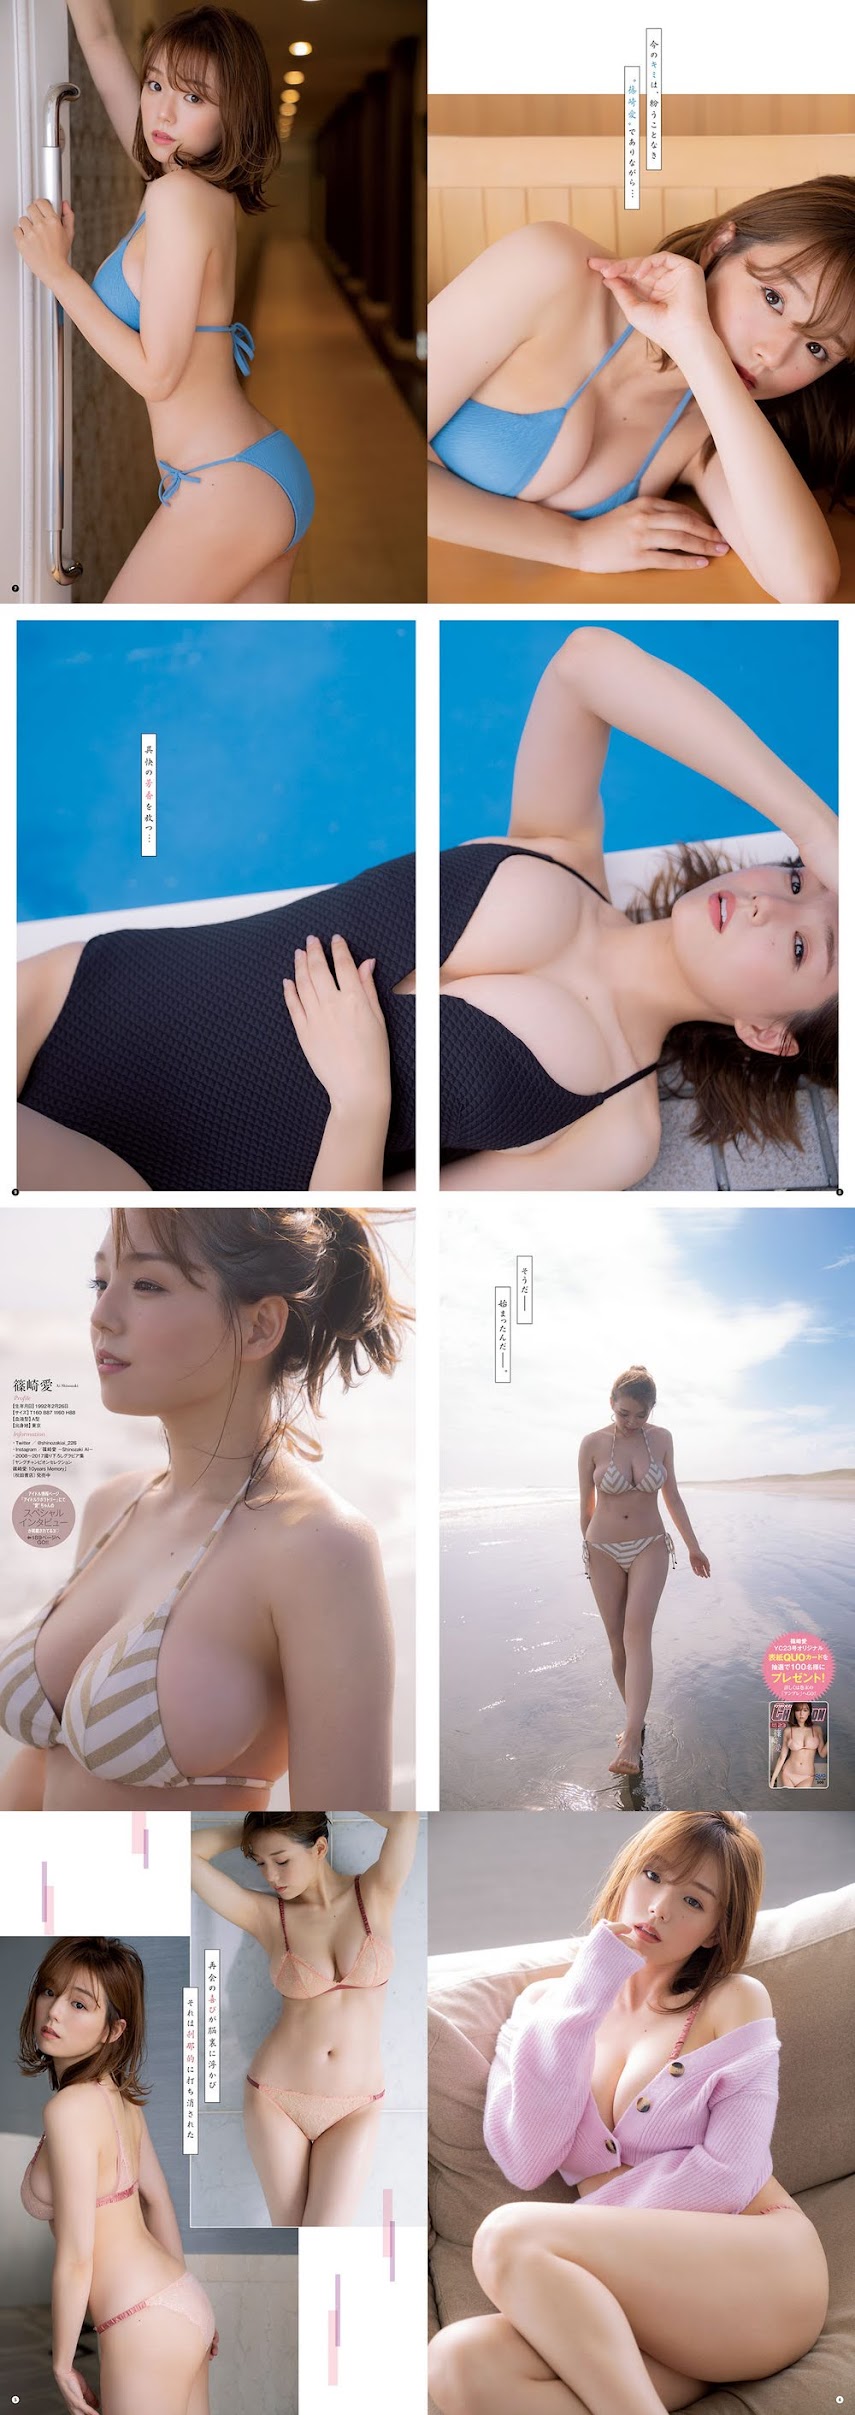 [Young Champion] 2021 No.23 (篠崎愛 他)   P214355 - Girlsdelta